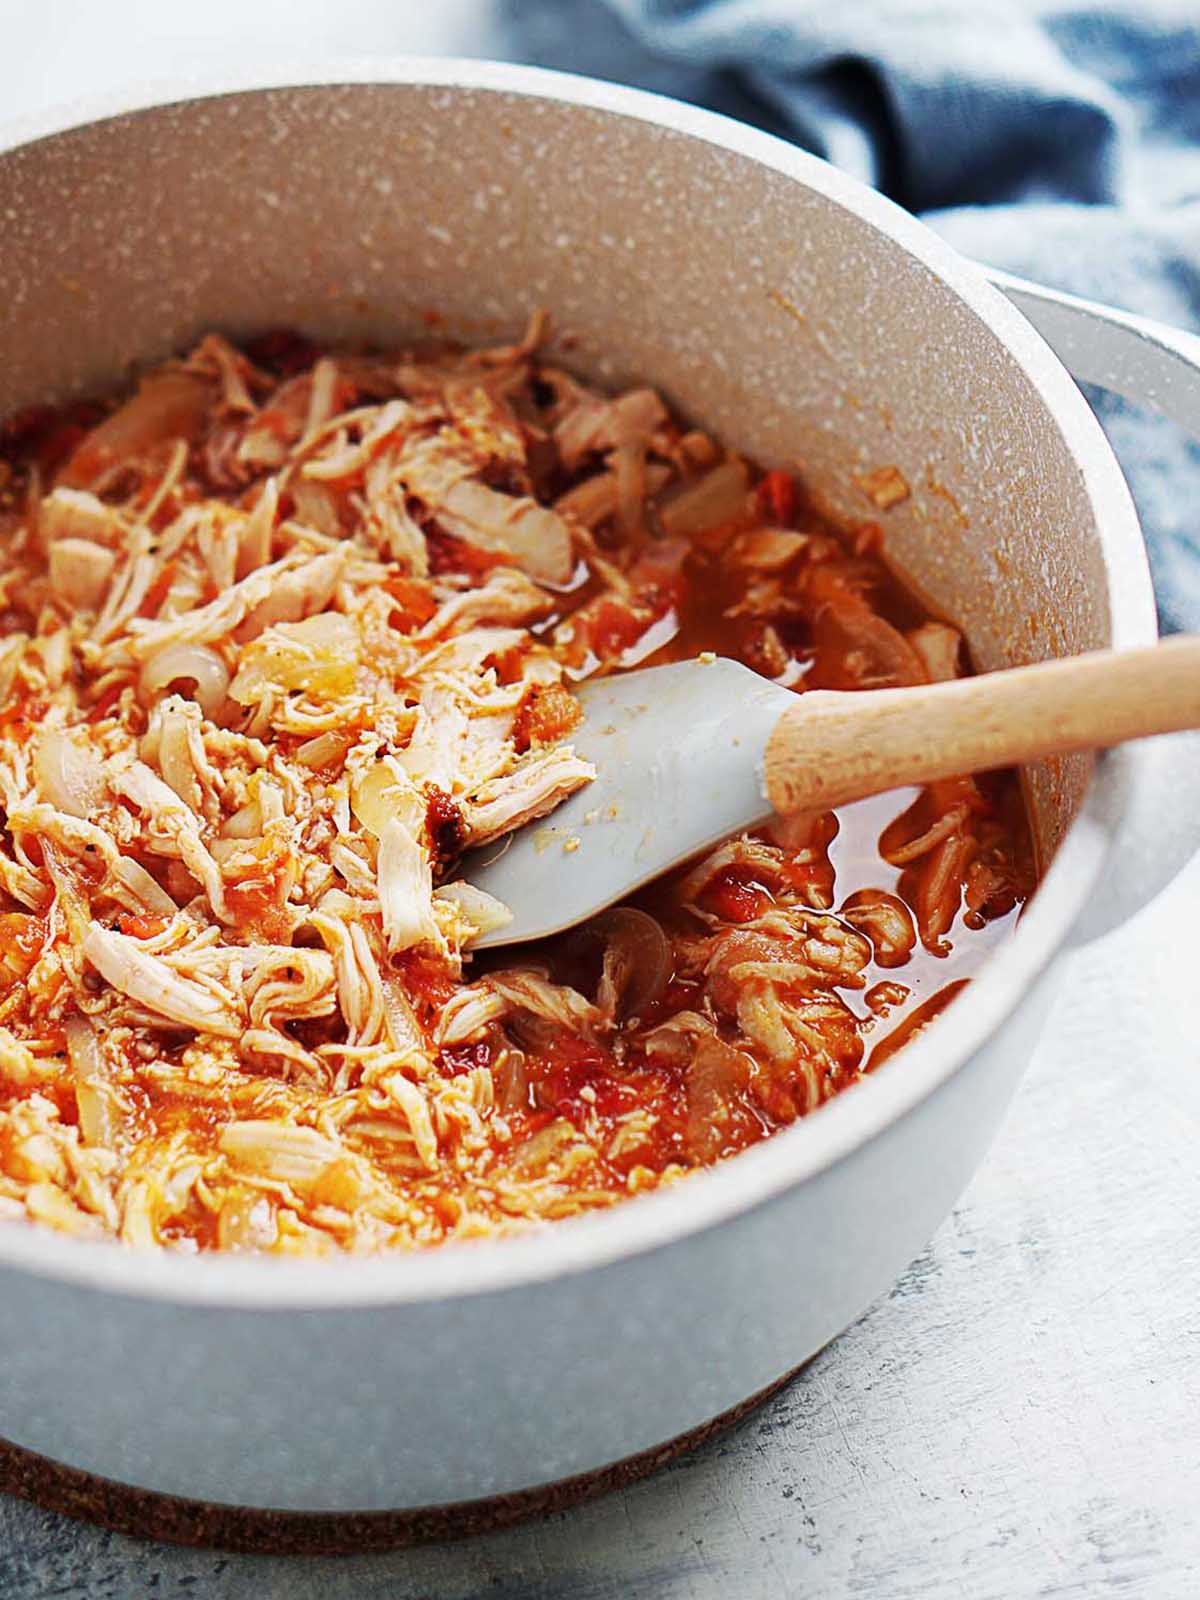 A medium saucepan with shredded chicken in a tomato and onions sauce.